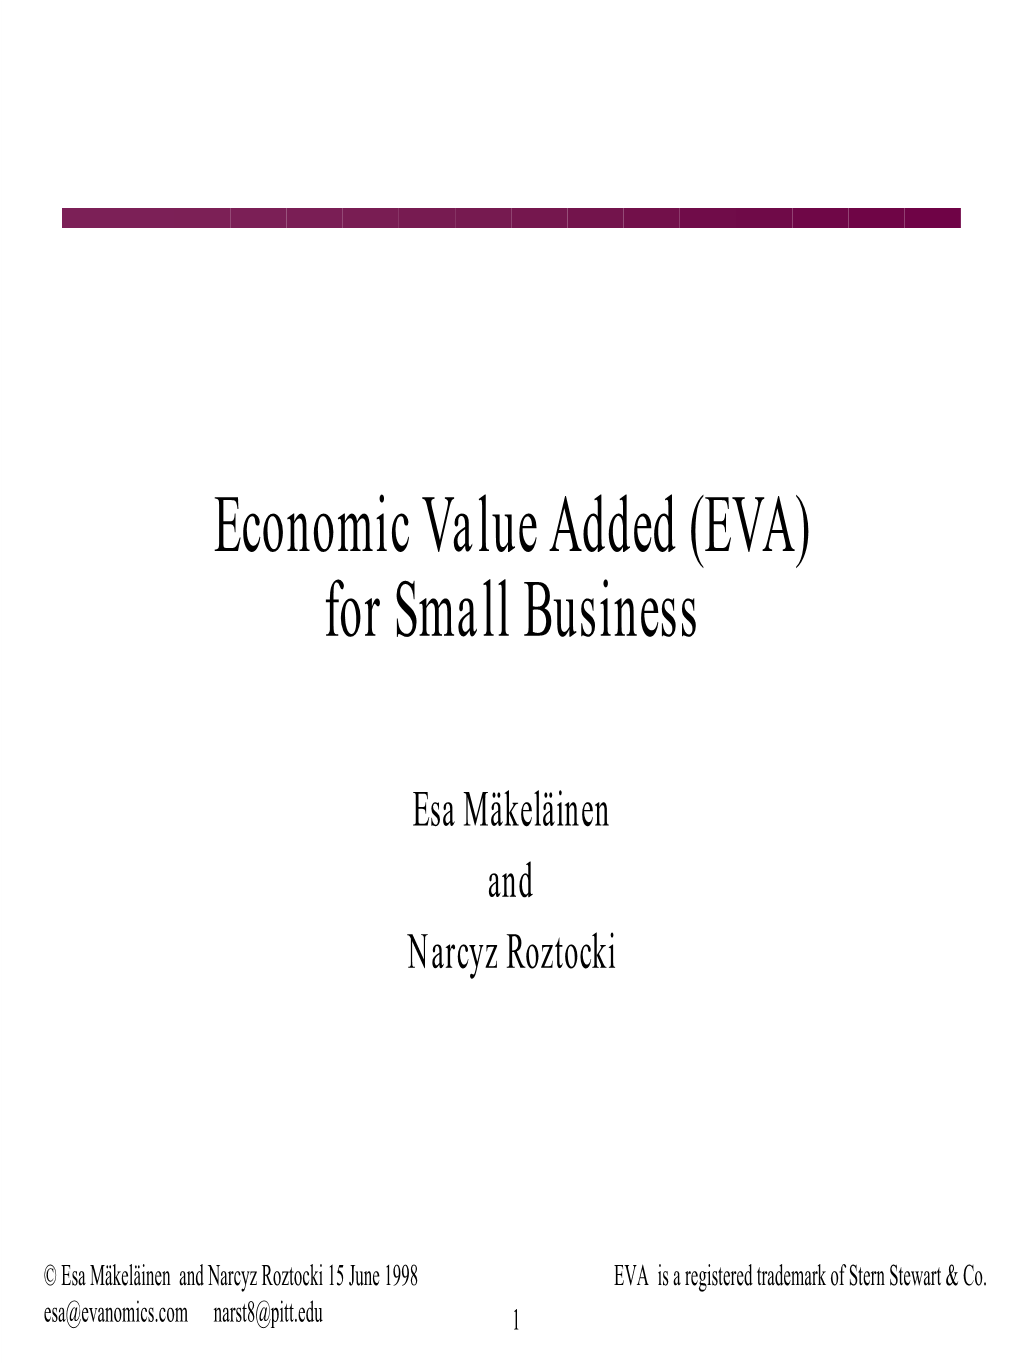 Economic Value Added (EVA) for Small Business